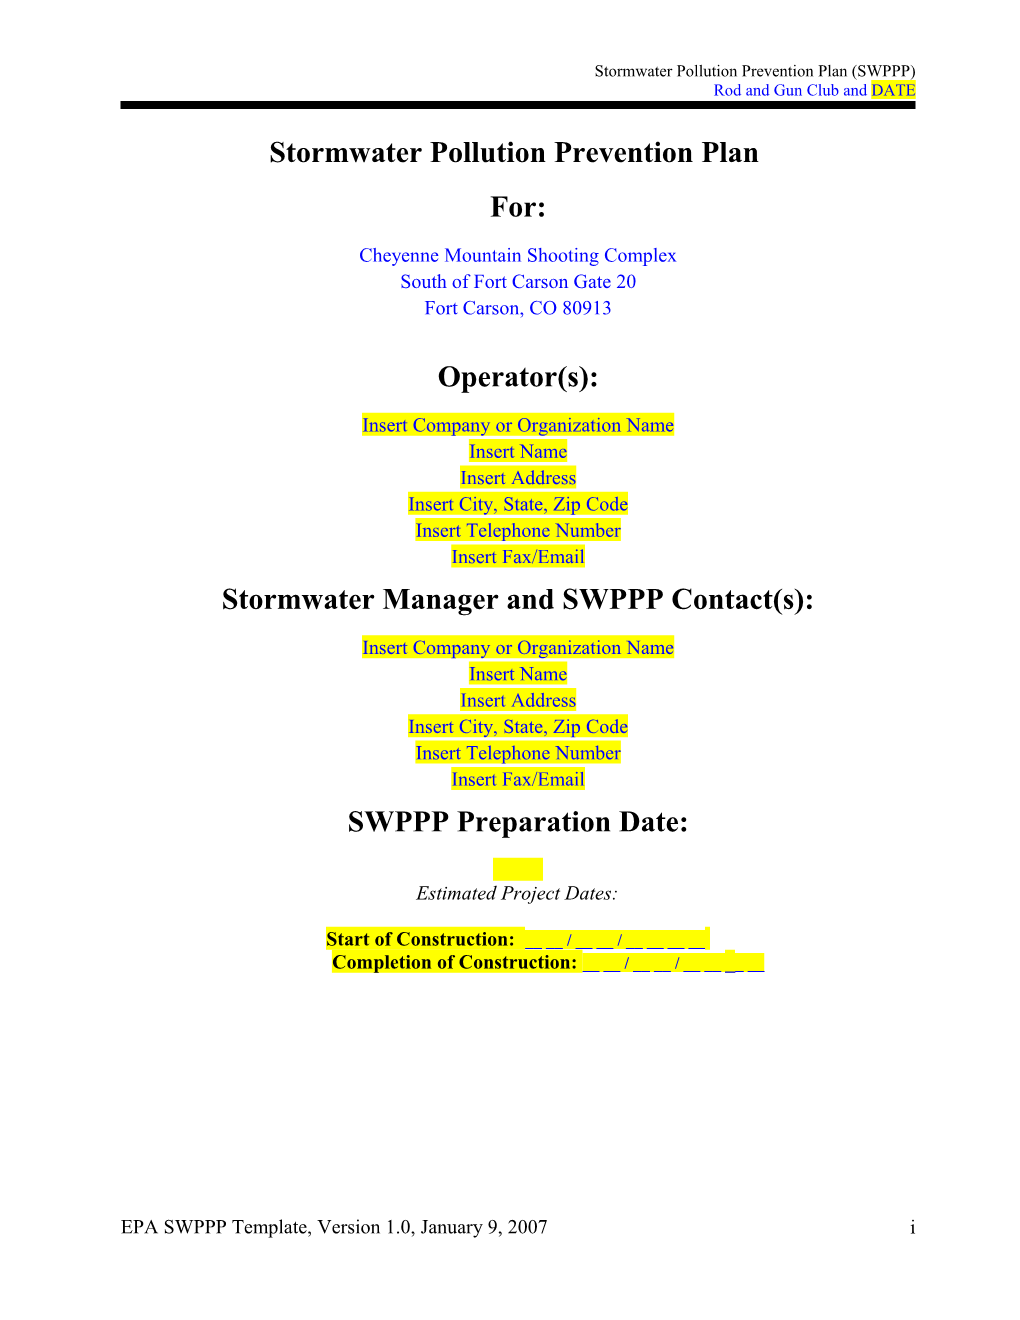 Stormwater Pollution Prevention Plan Template s3